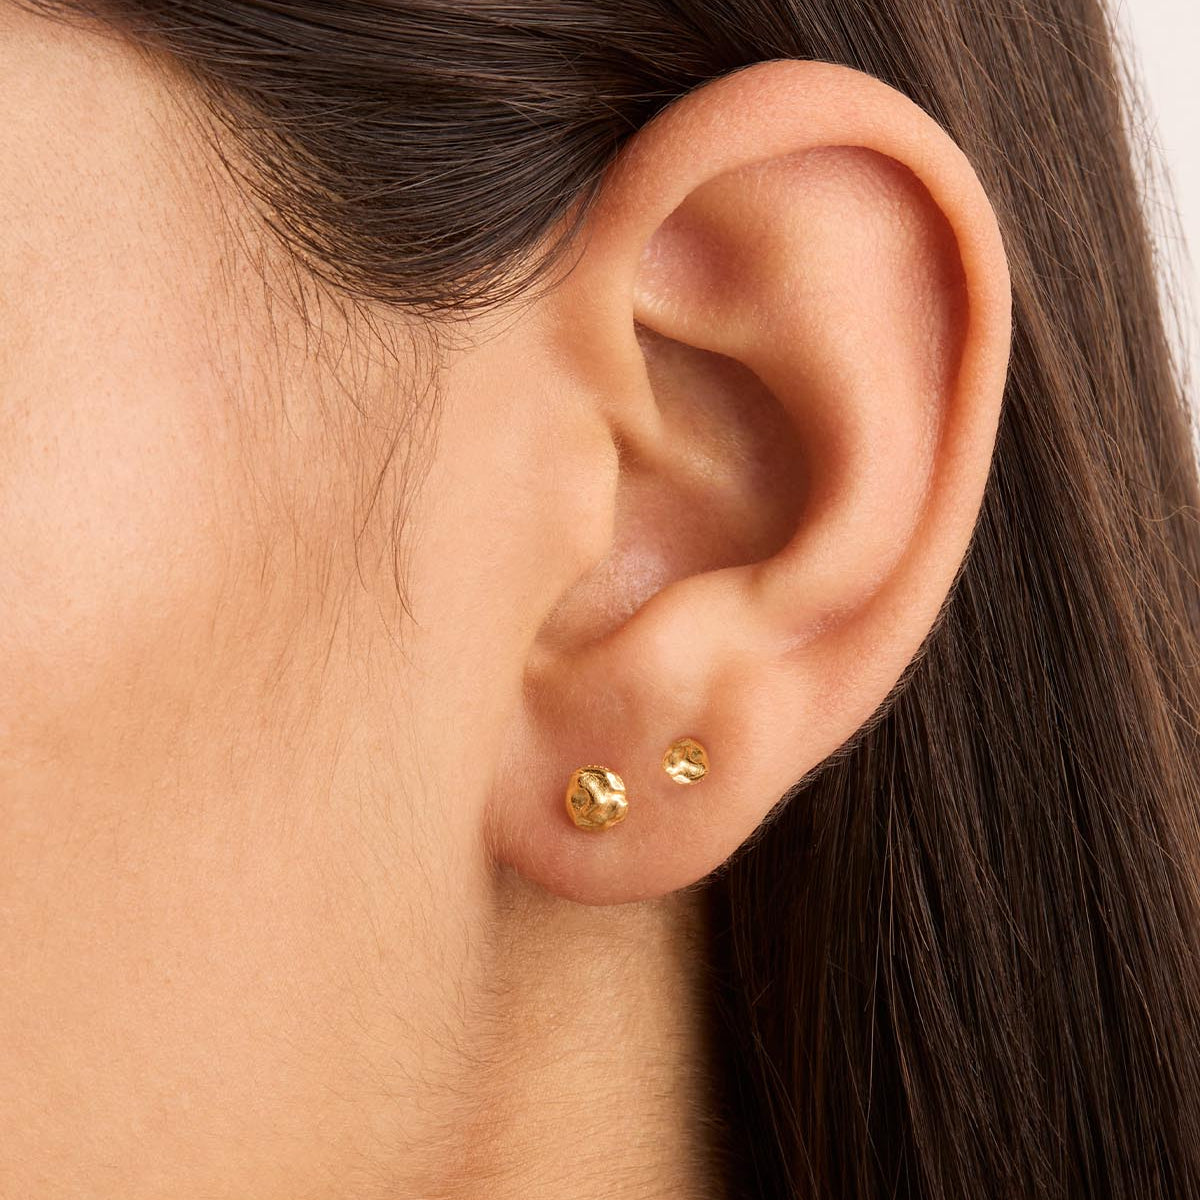 18k Gold Vermeil All Kinds of Beautiful Stud Earrings – by charlotte